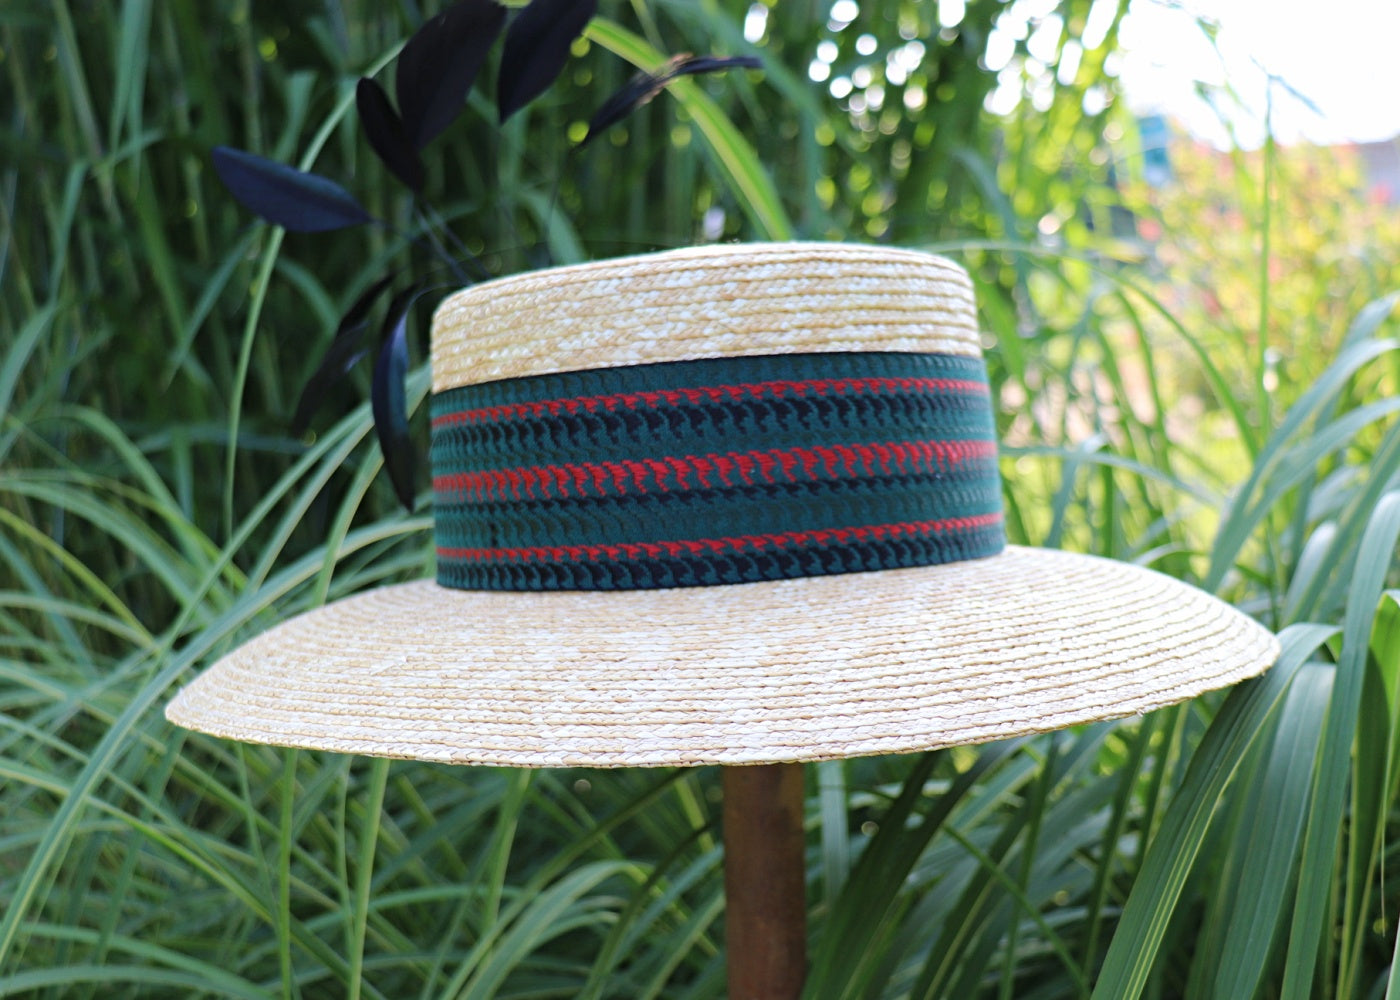 Straw hat - natural braided straw hat with wide band